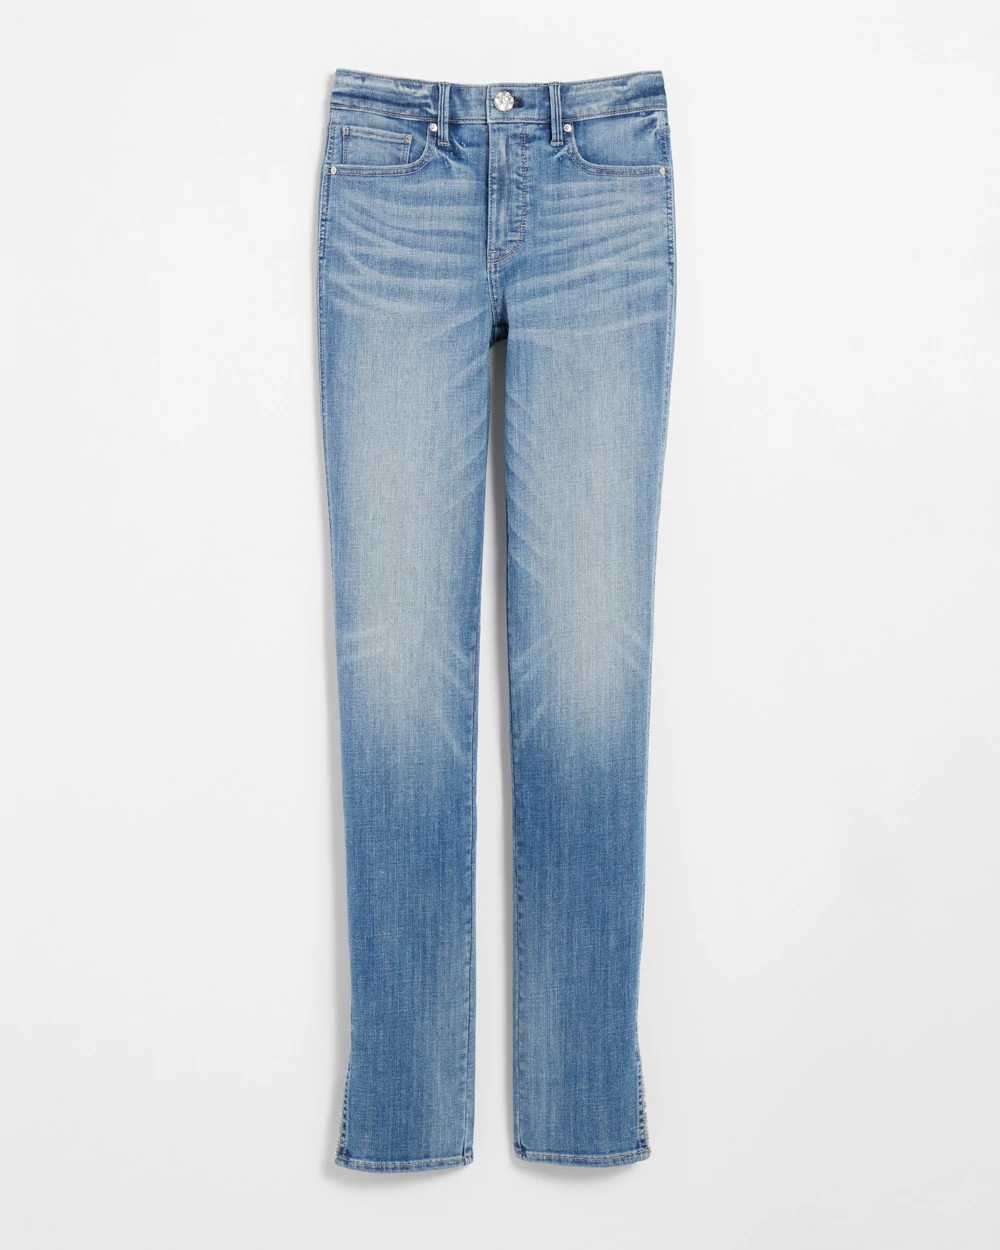 High-Rise Everyday Soft Novelty Slim Jeans With Slit click to view larger image.